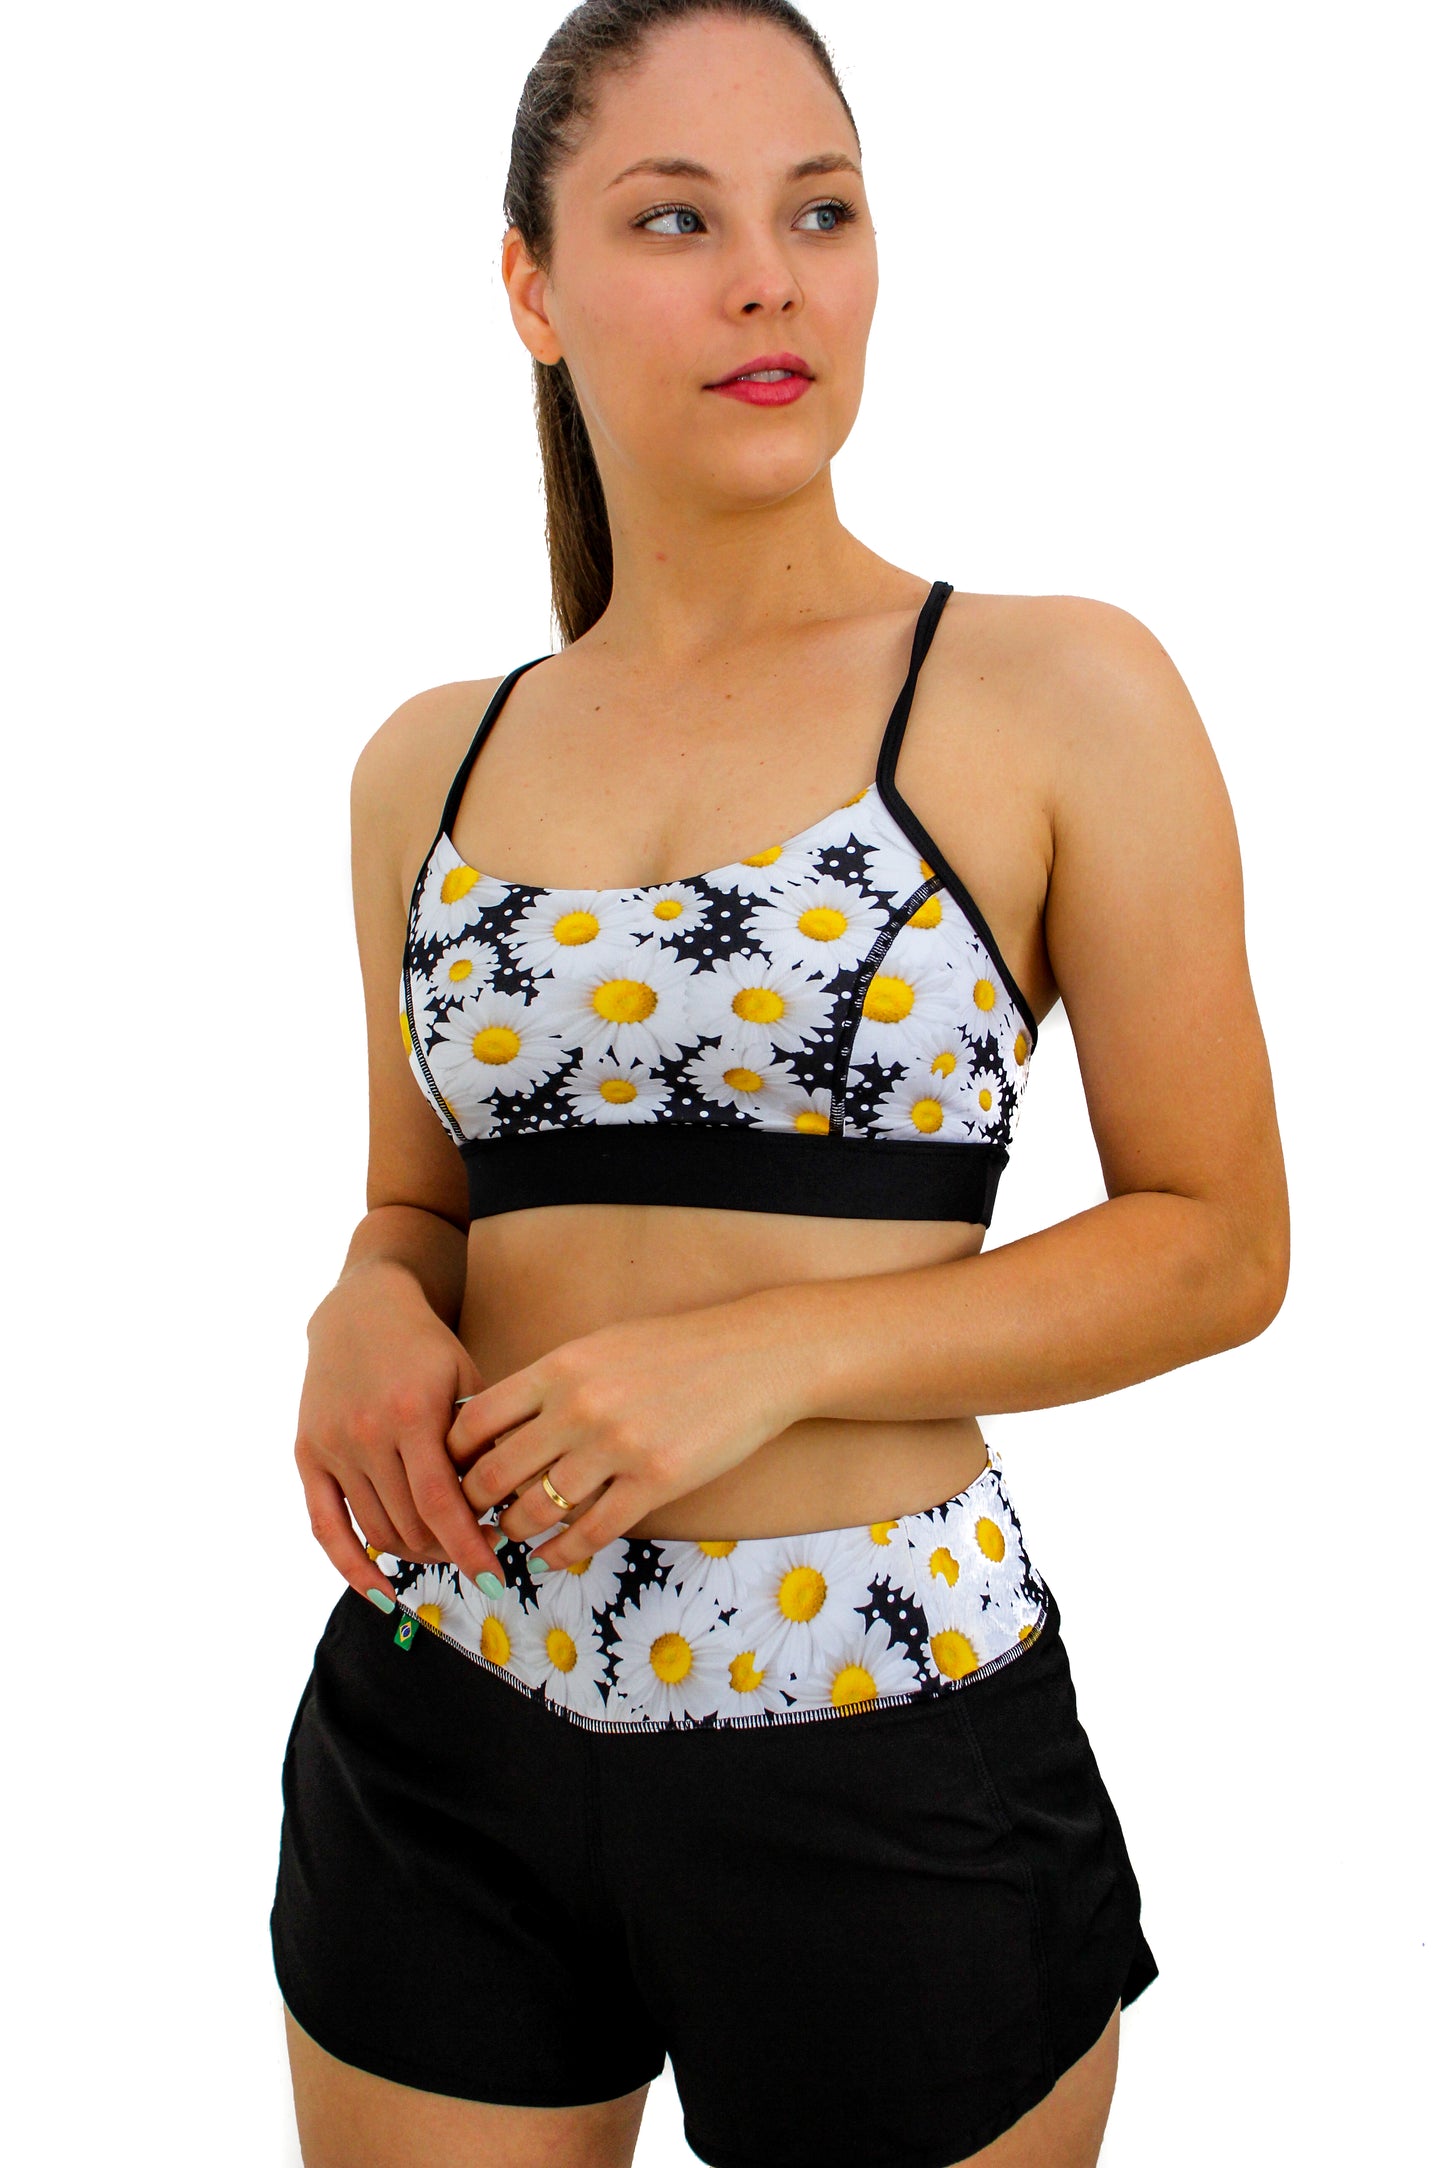 Daisy Sports Bra Classic style - holds very well